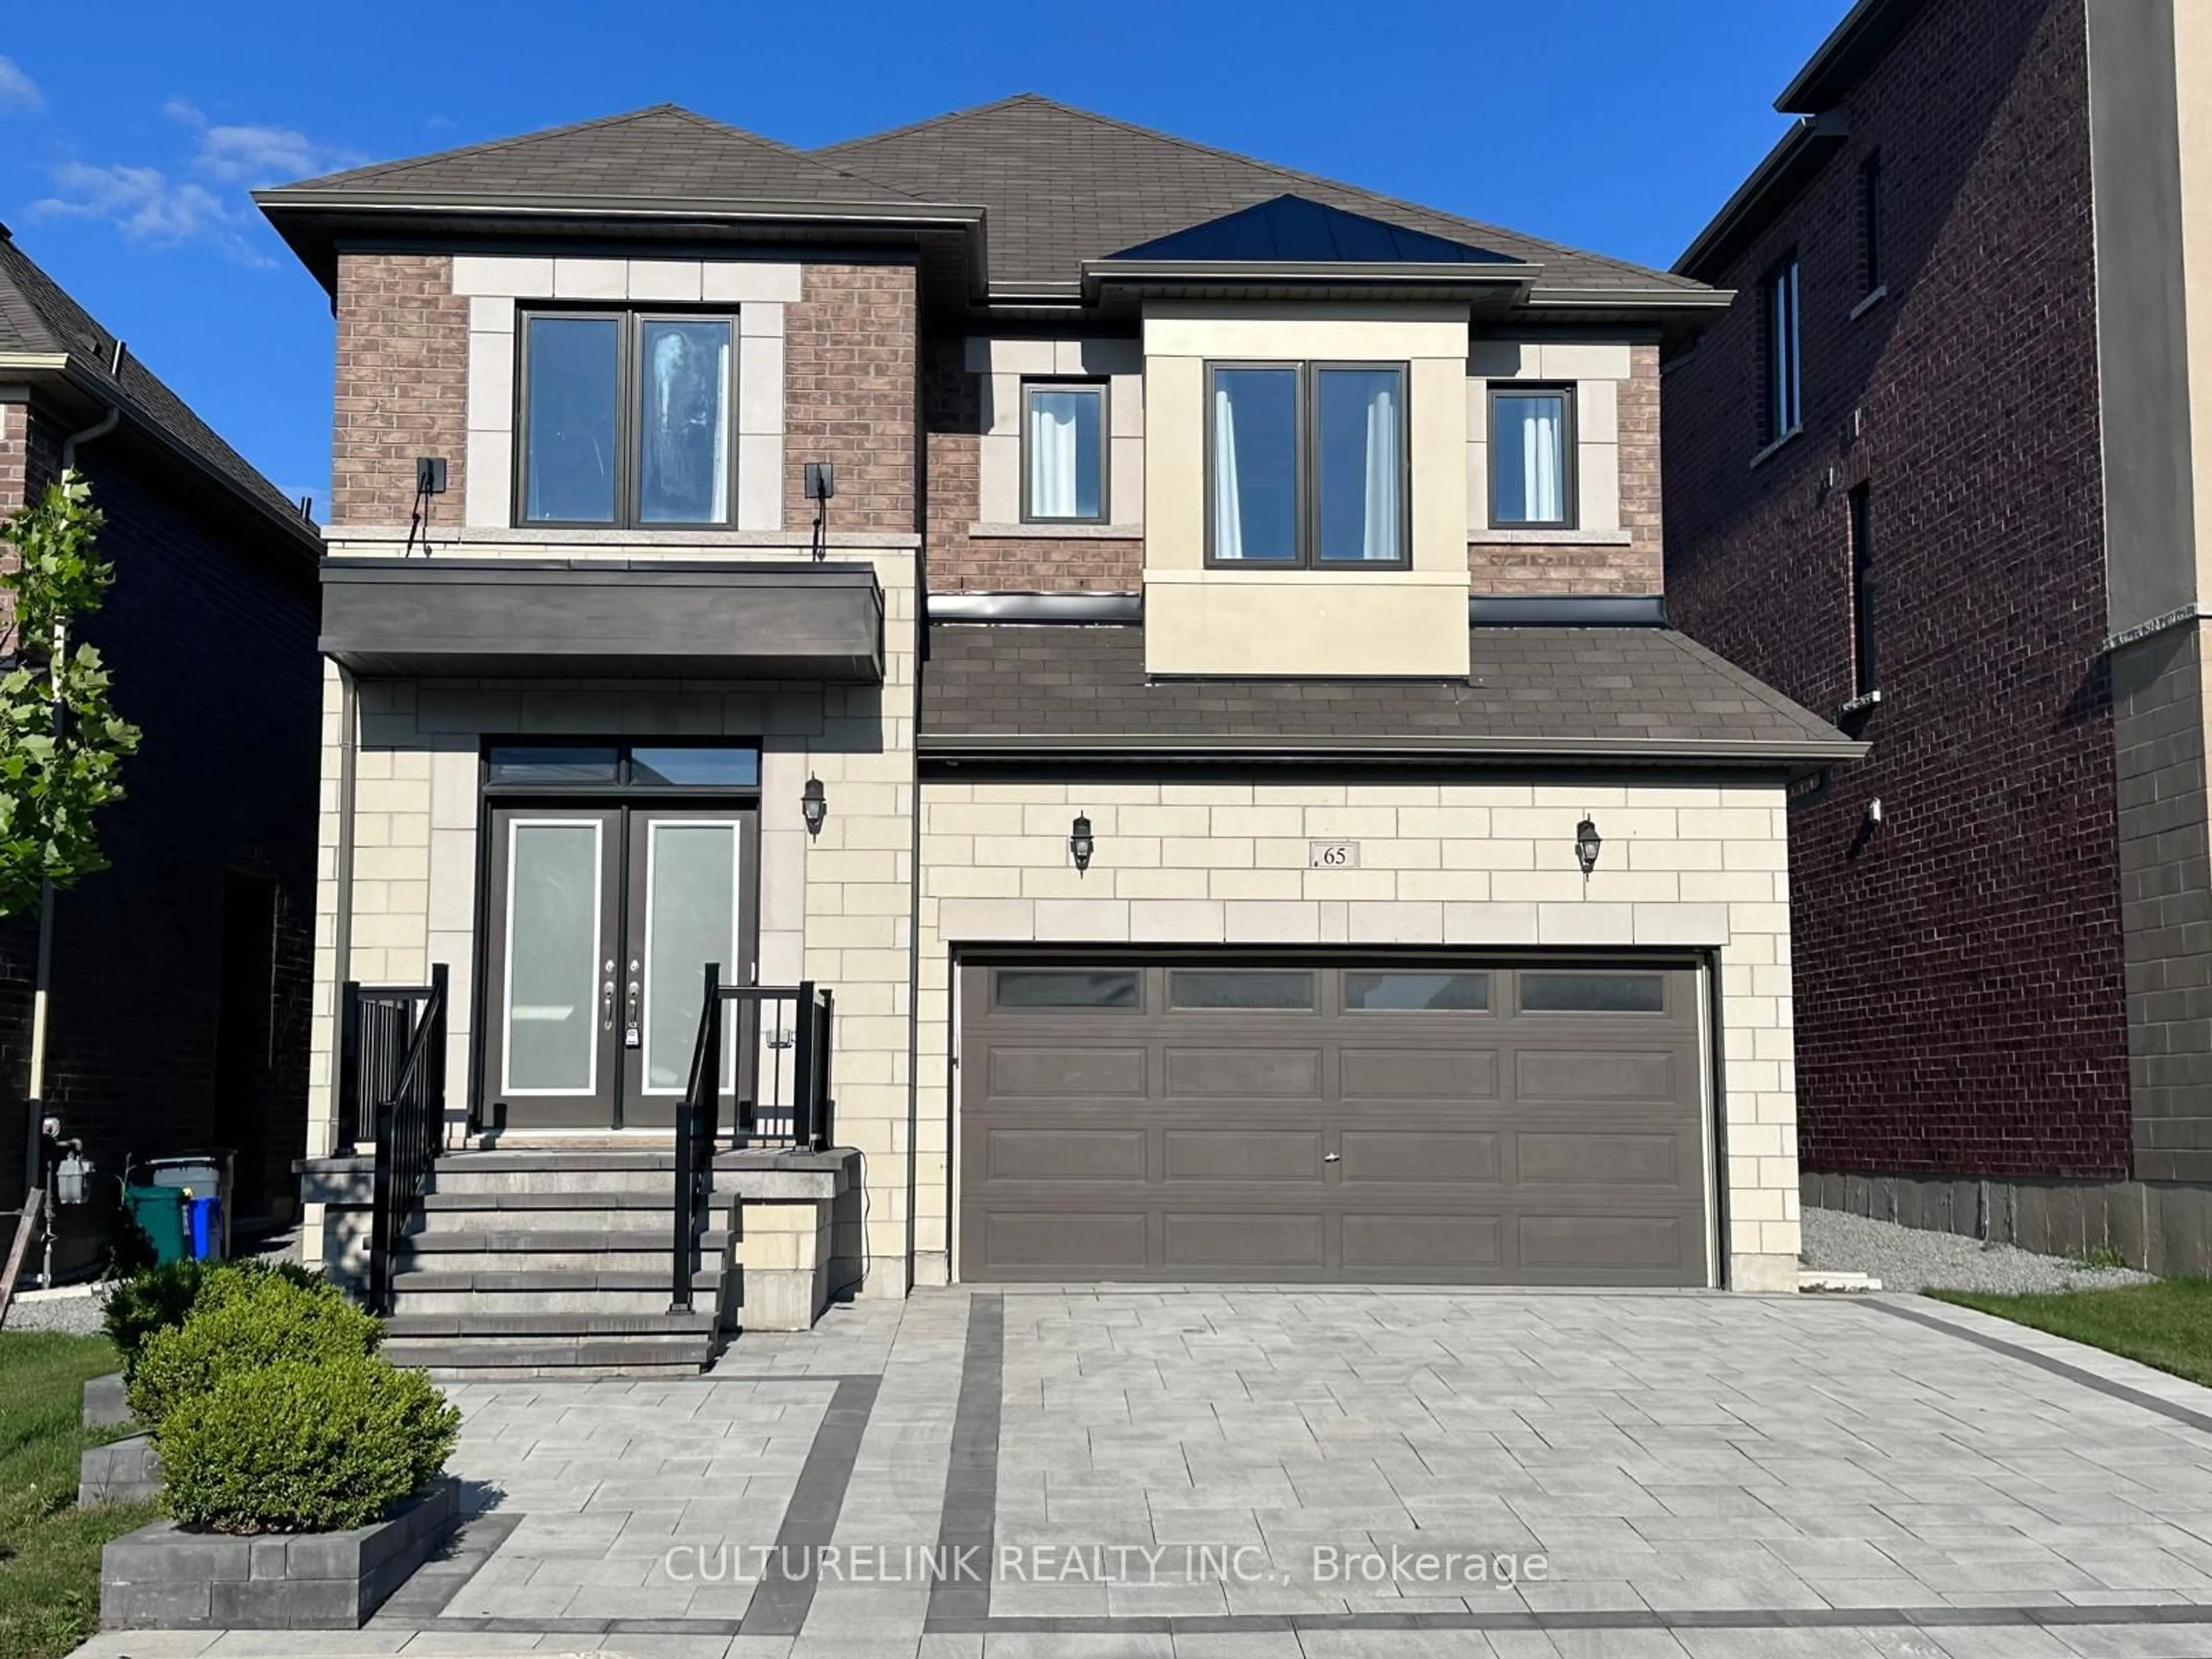 Home with brick exterior material for 65 Murray Leonard Lane, East Gwillimbury Ontario L9N 0Z5